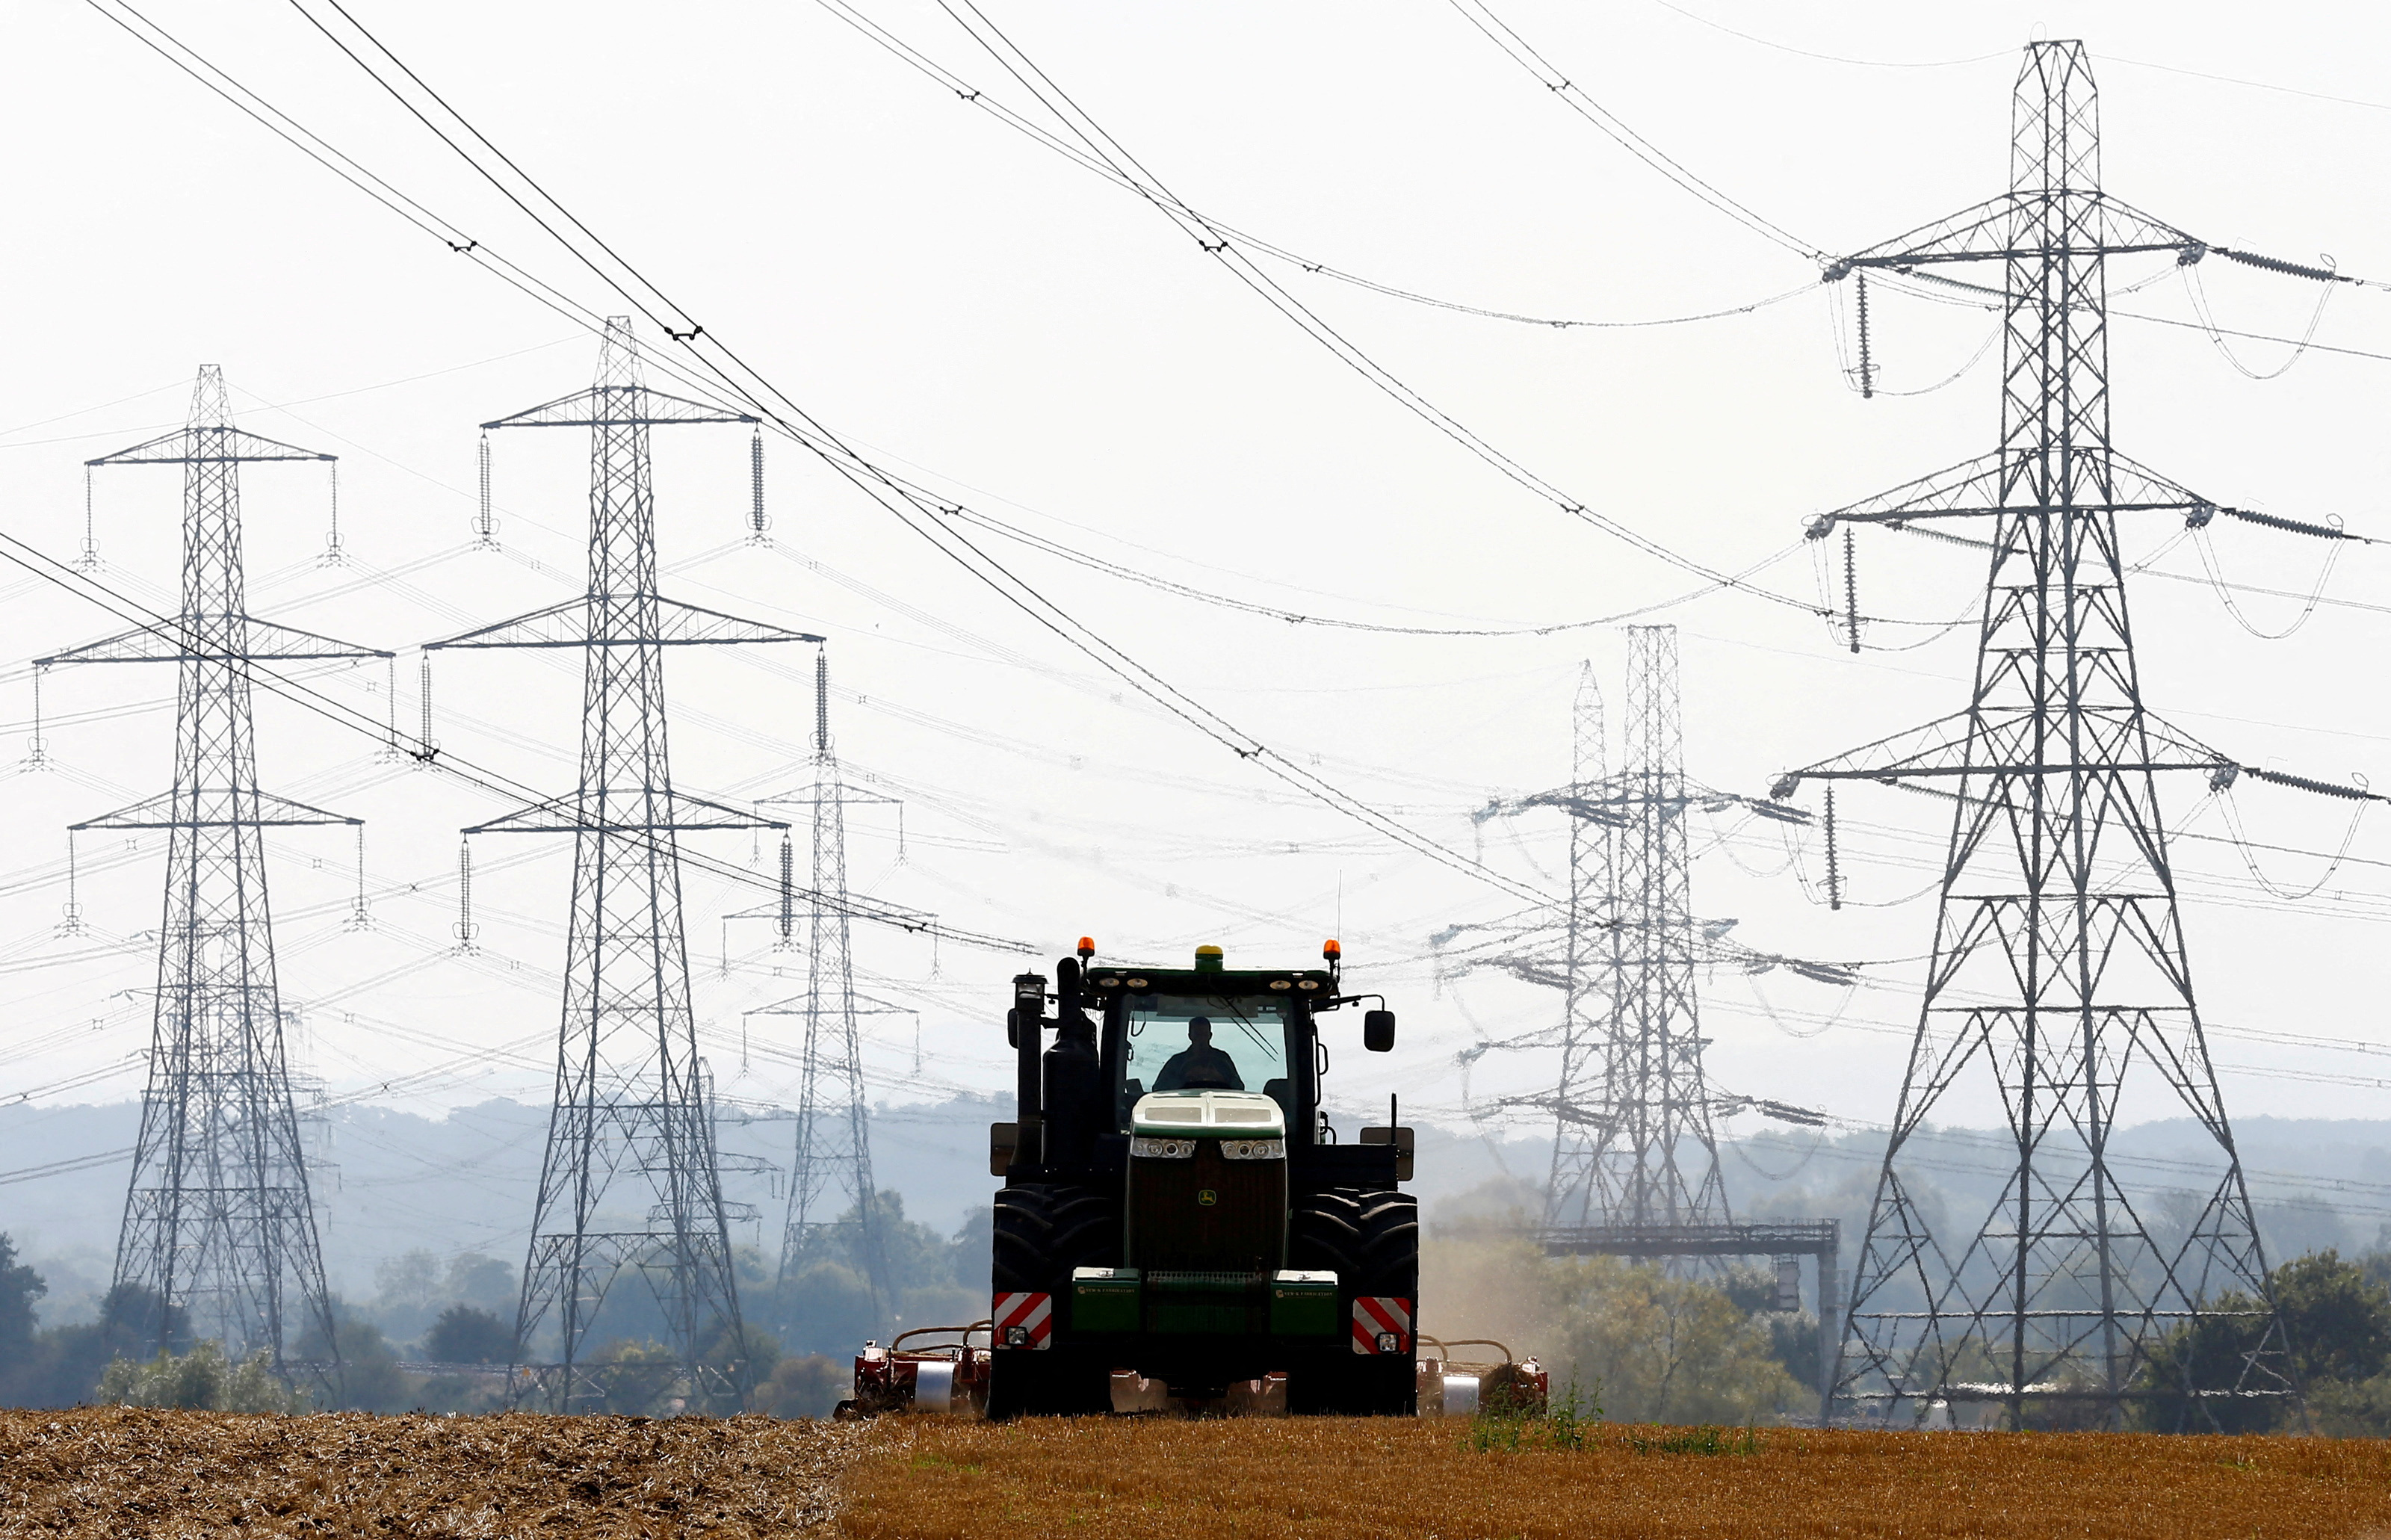 A farmer works in a field surrounded by electricity pylons in Ratcliffe-on-Soar